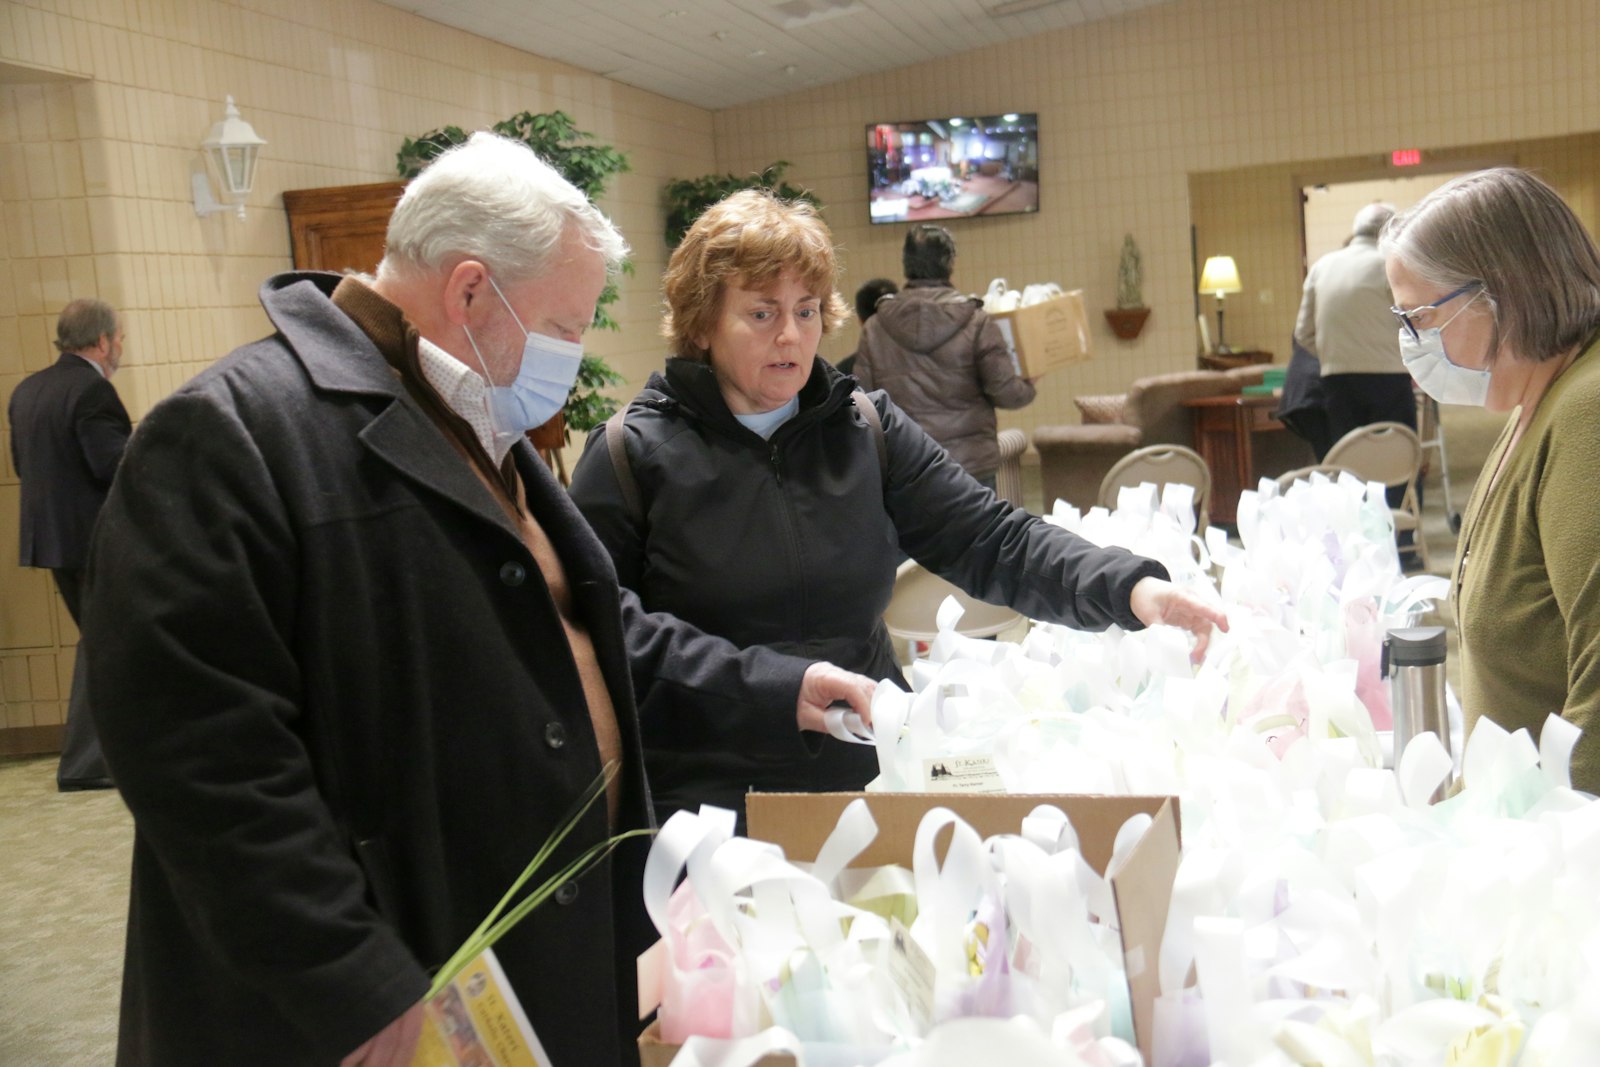 St. Kateri parishioners pick up Easter bags to deliver to elderly parishioners after Mass on Palm Sunday, April 10. The parish started the outreach program during the pandemic, but decided to continue to let senior members of the parish know they're still a valued part of the parish community.